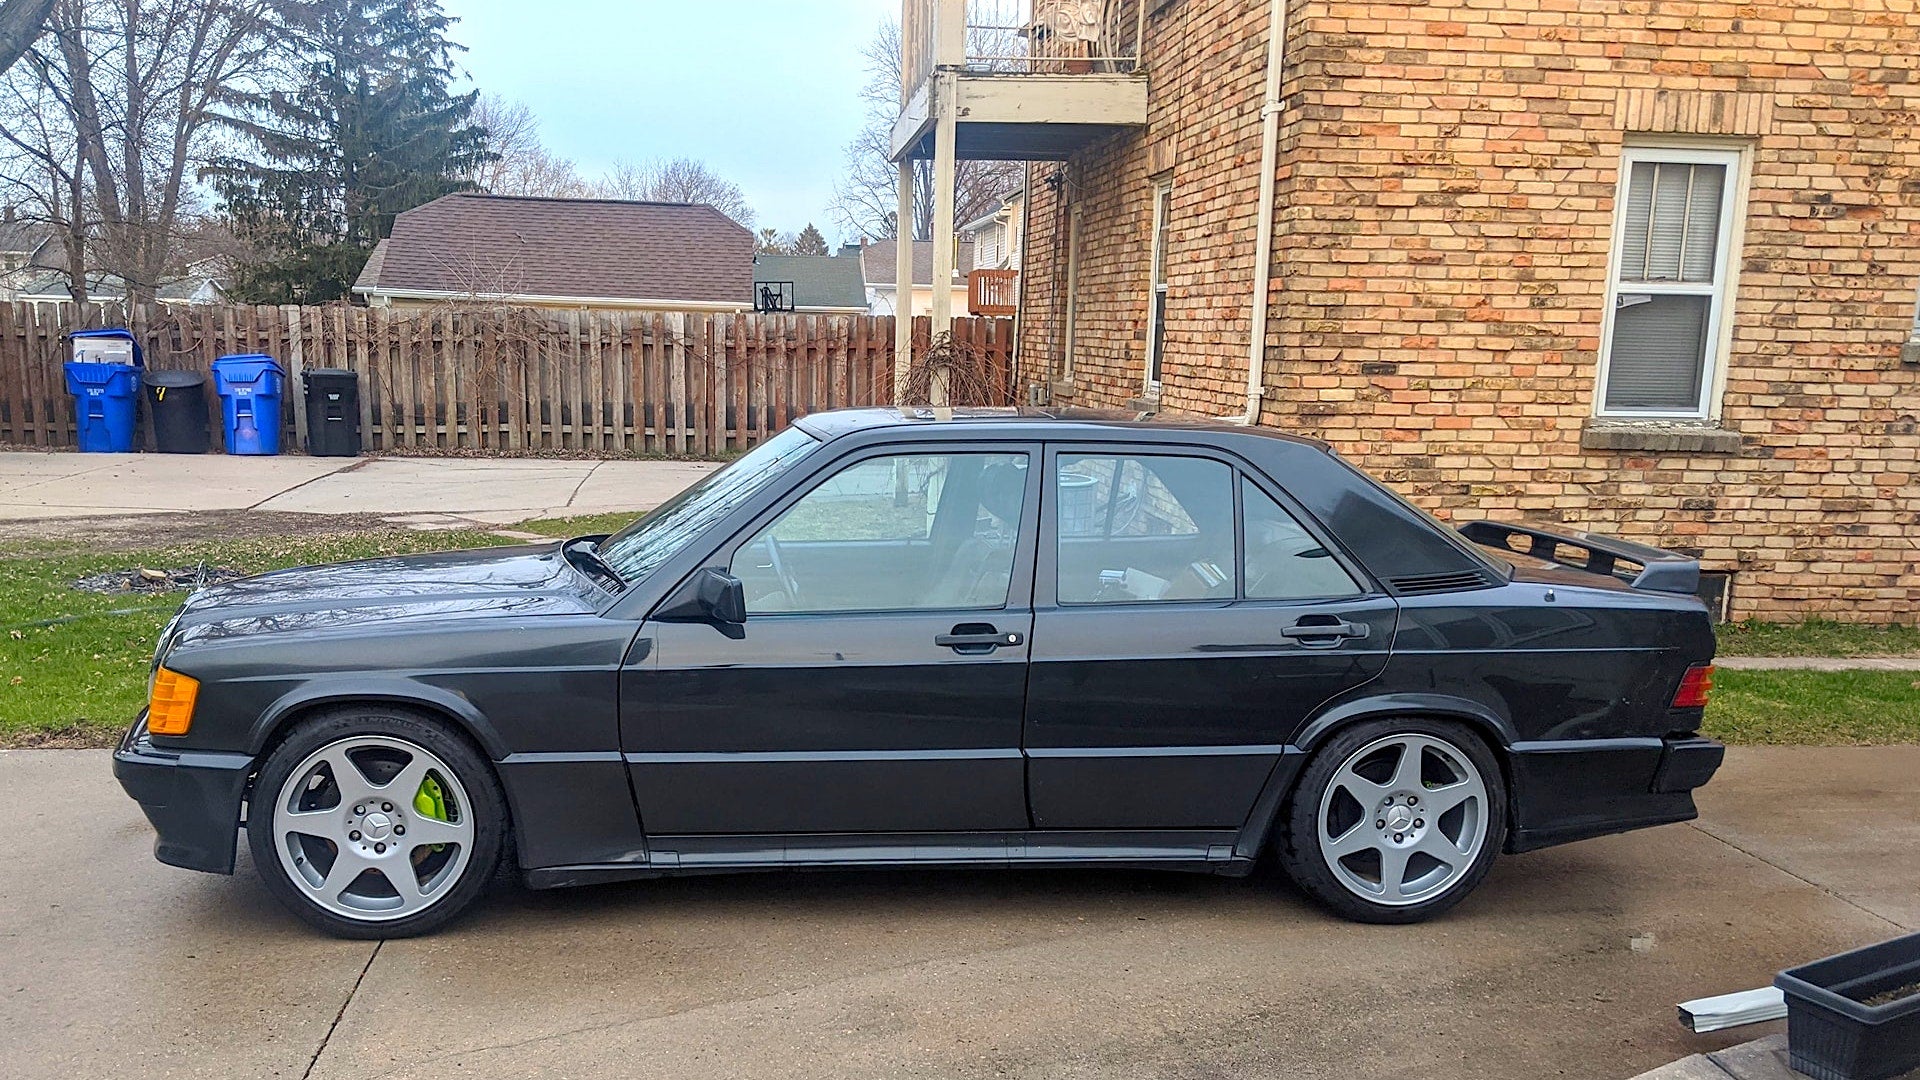 This Rare Stick-Shift Mercedes-Benz 190E Cosworth For Sale Packs a Turbo and Supercharger